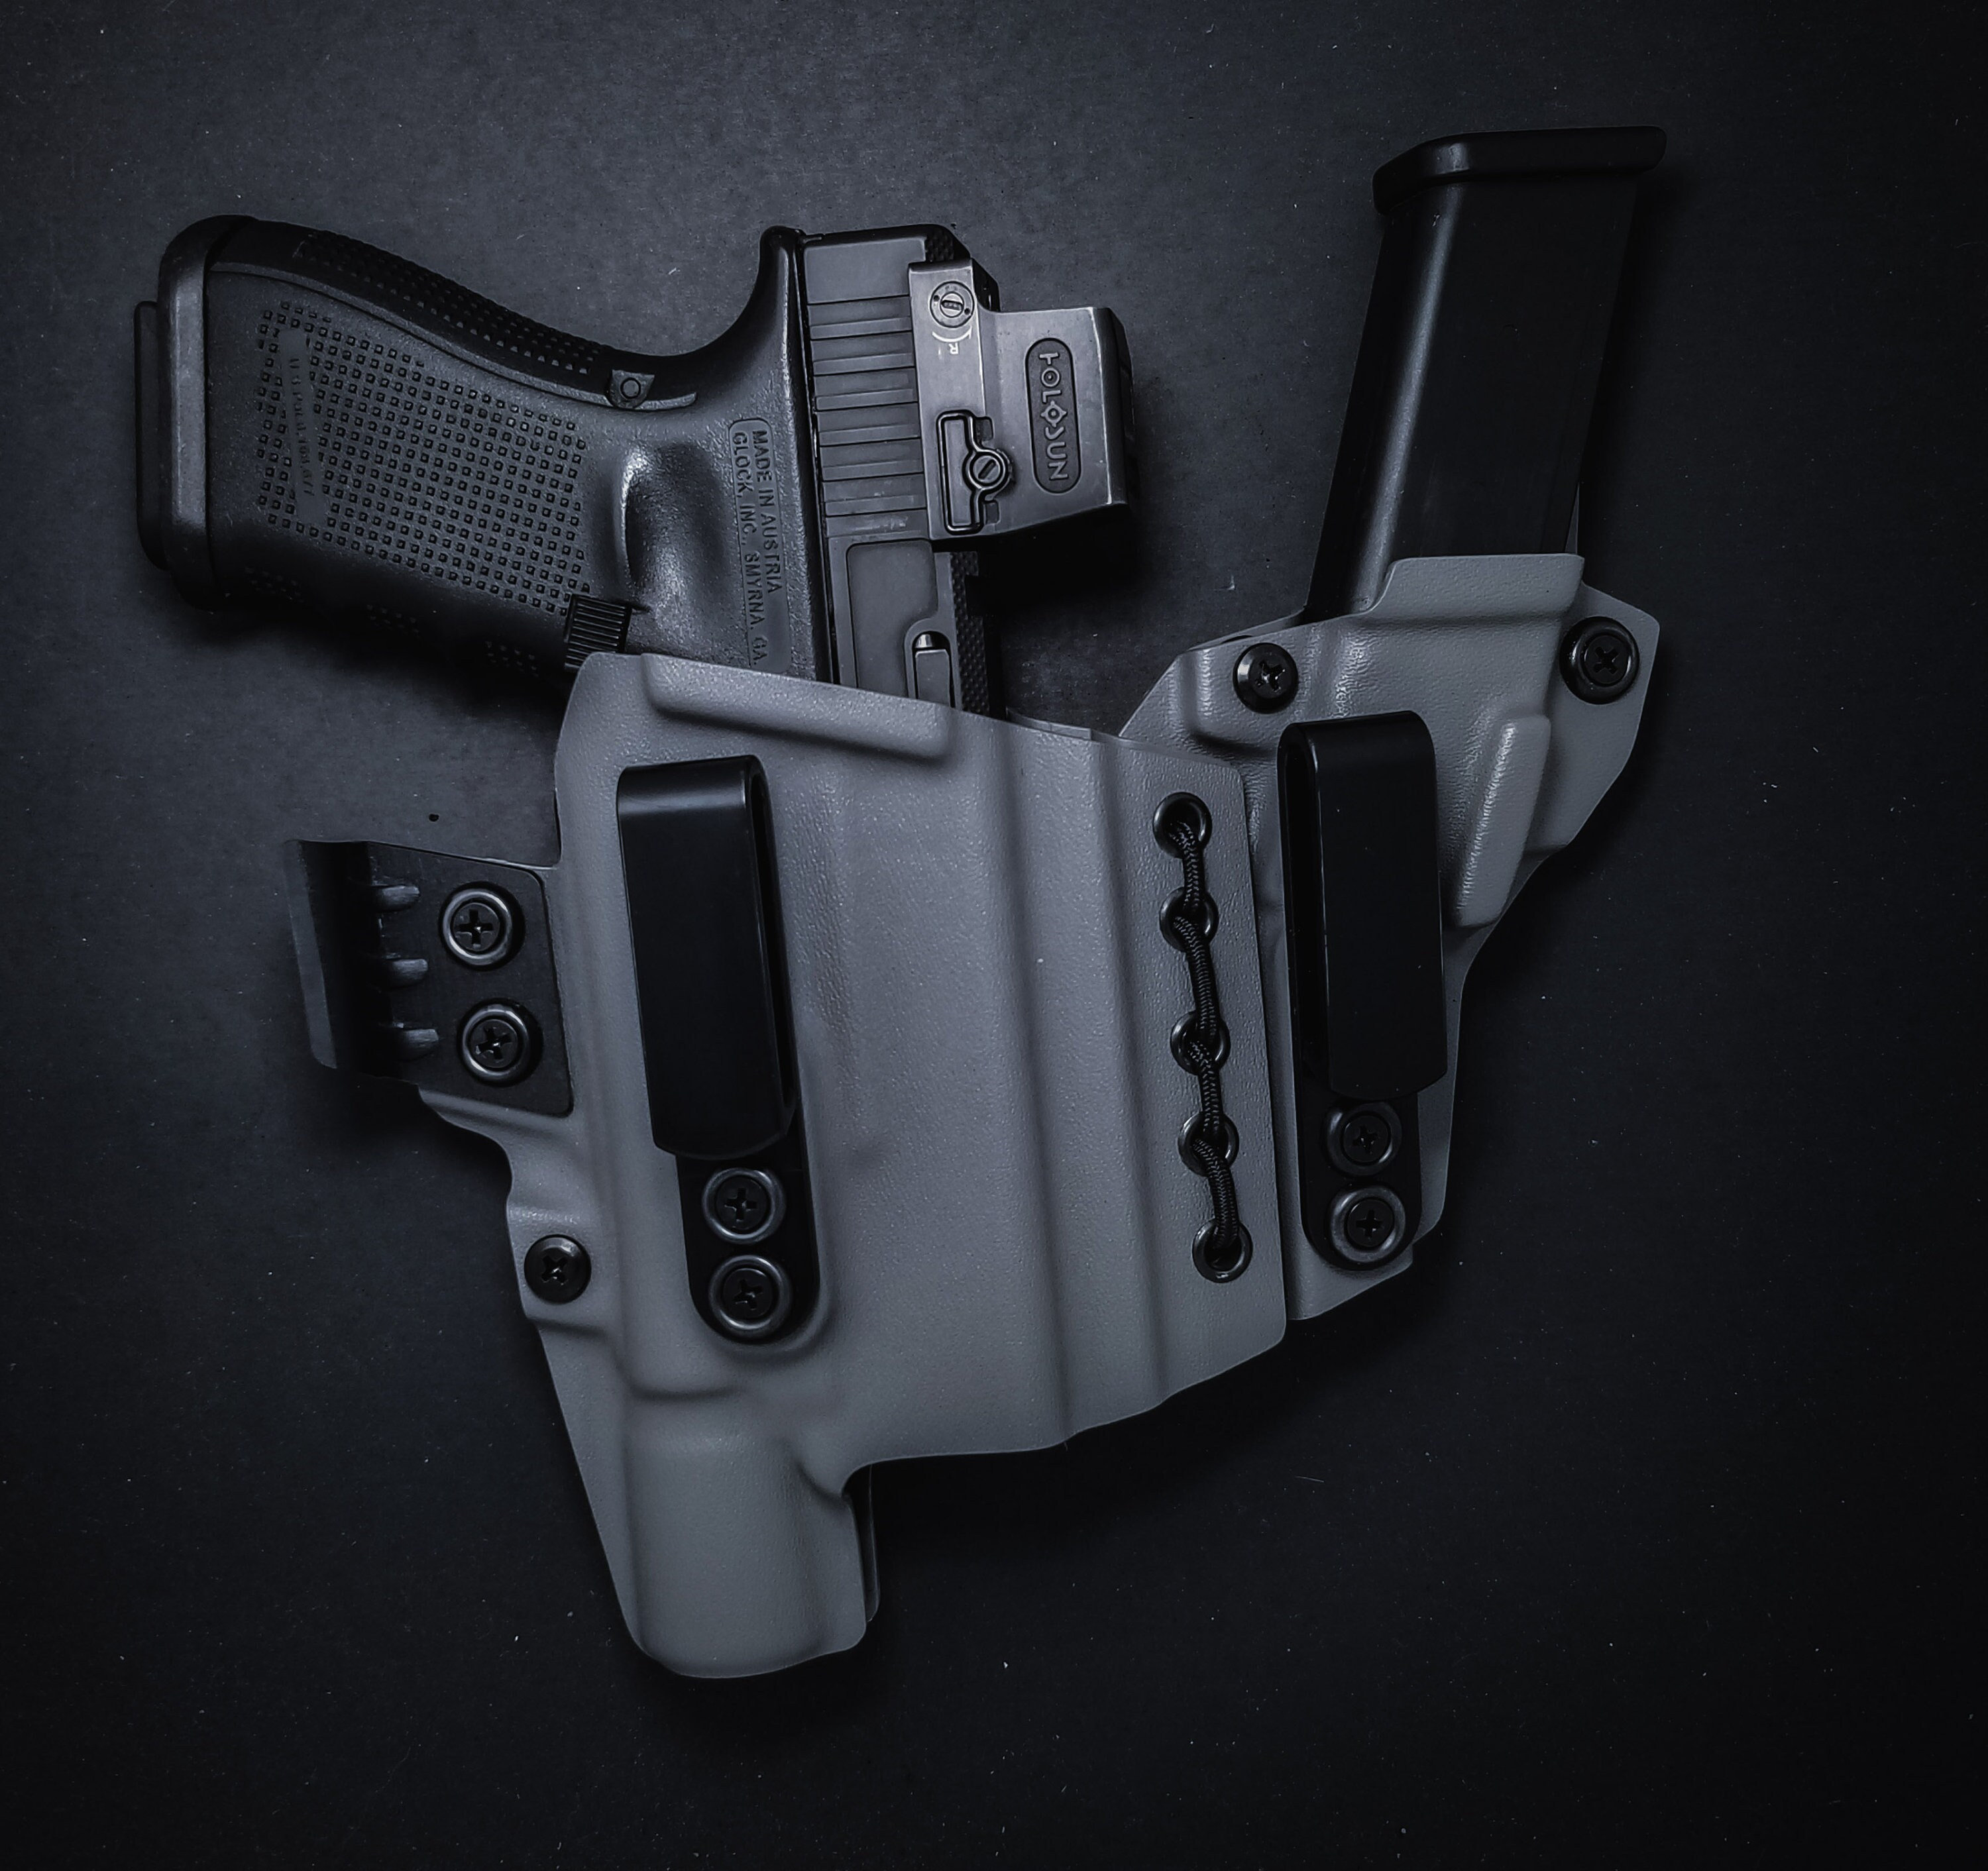  Holster for Glock 19/17 with Streamlight TLR-1 HL - OWB Holster  for Concealed Carry/Bravo Concealment : Sports & Outdoors